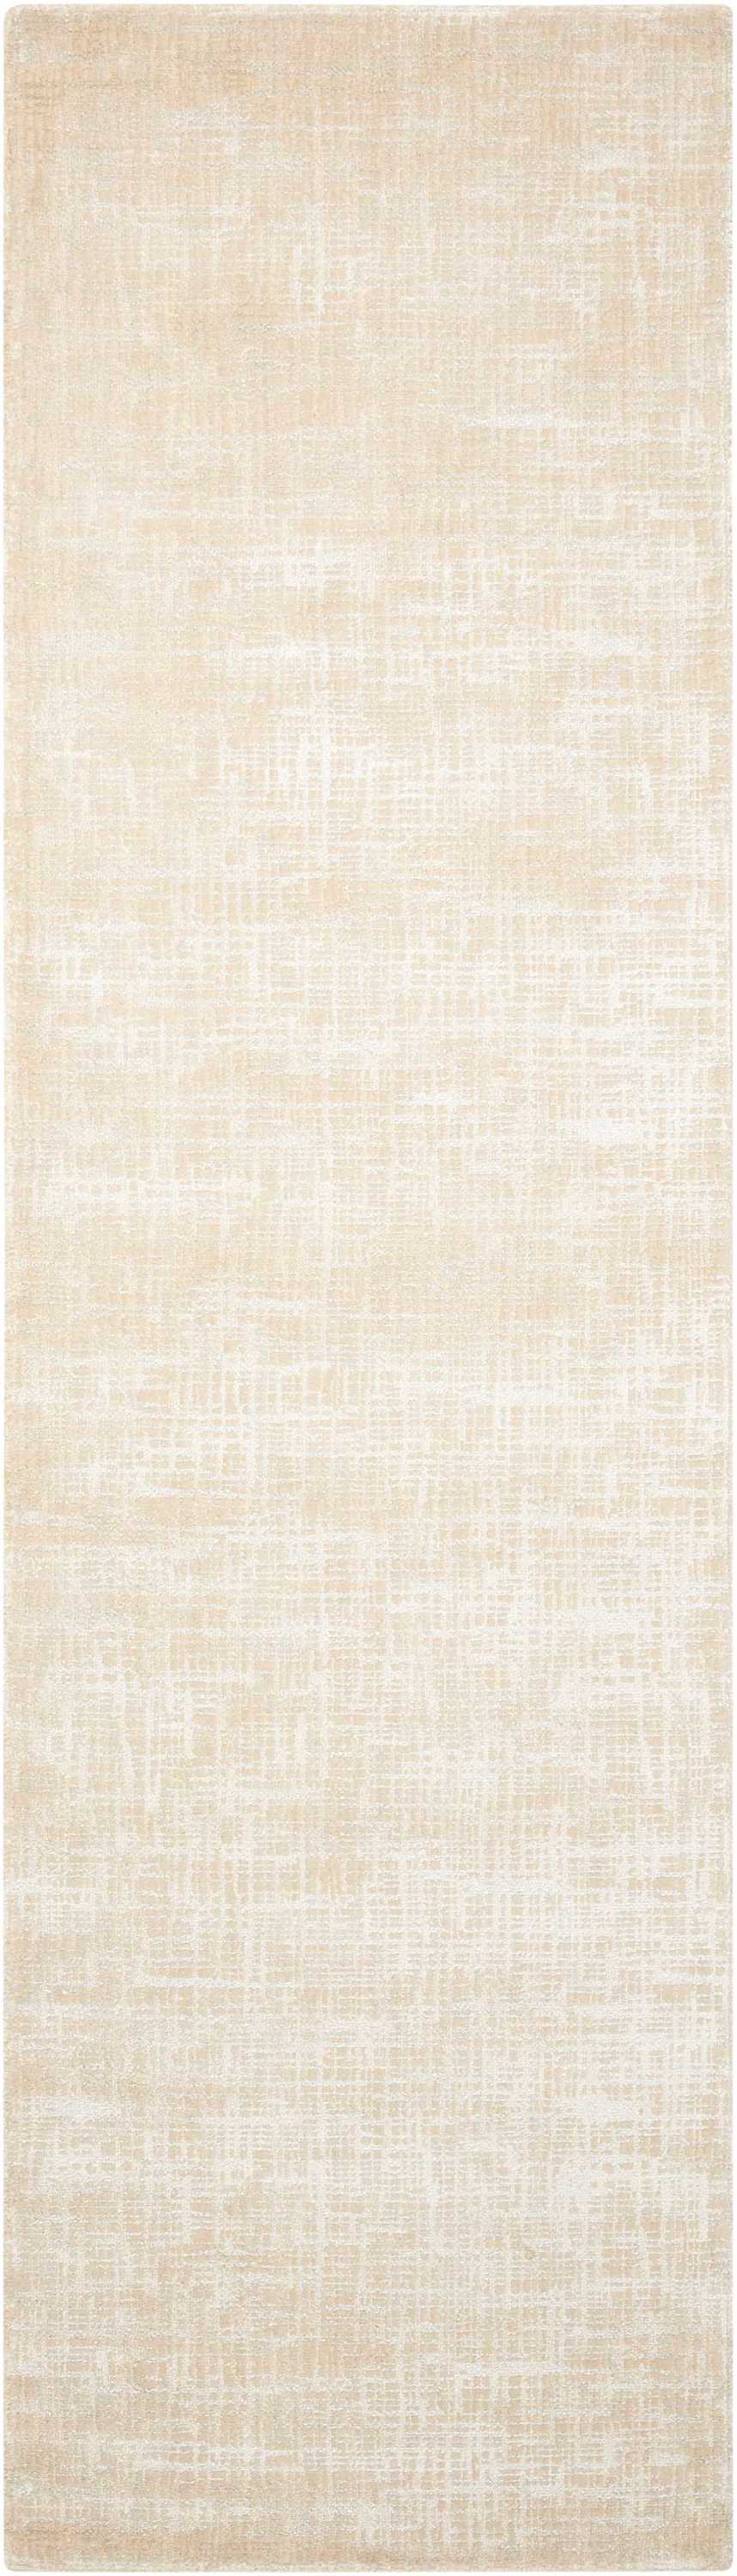 Nourison Home Starlight STA02 Oyster Contemporary Loom Rug